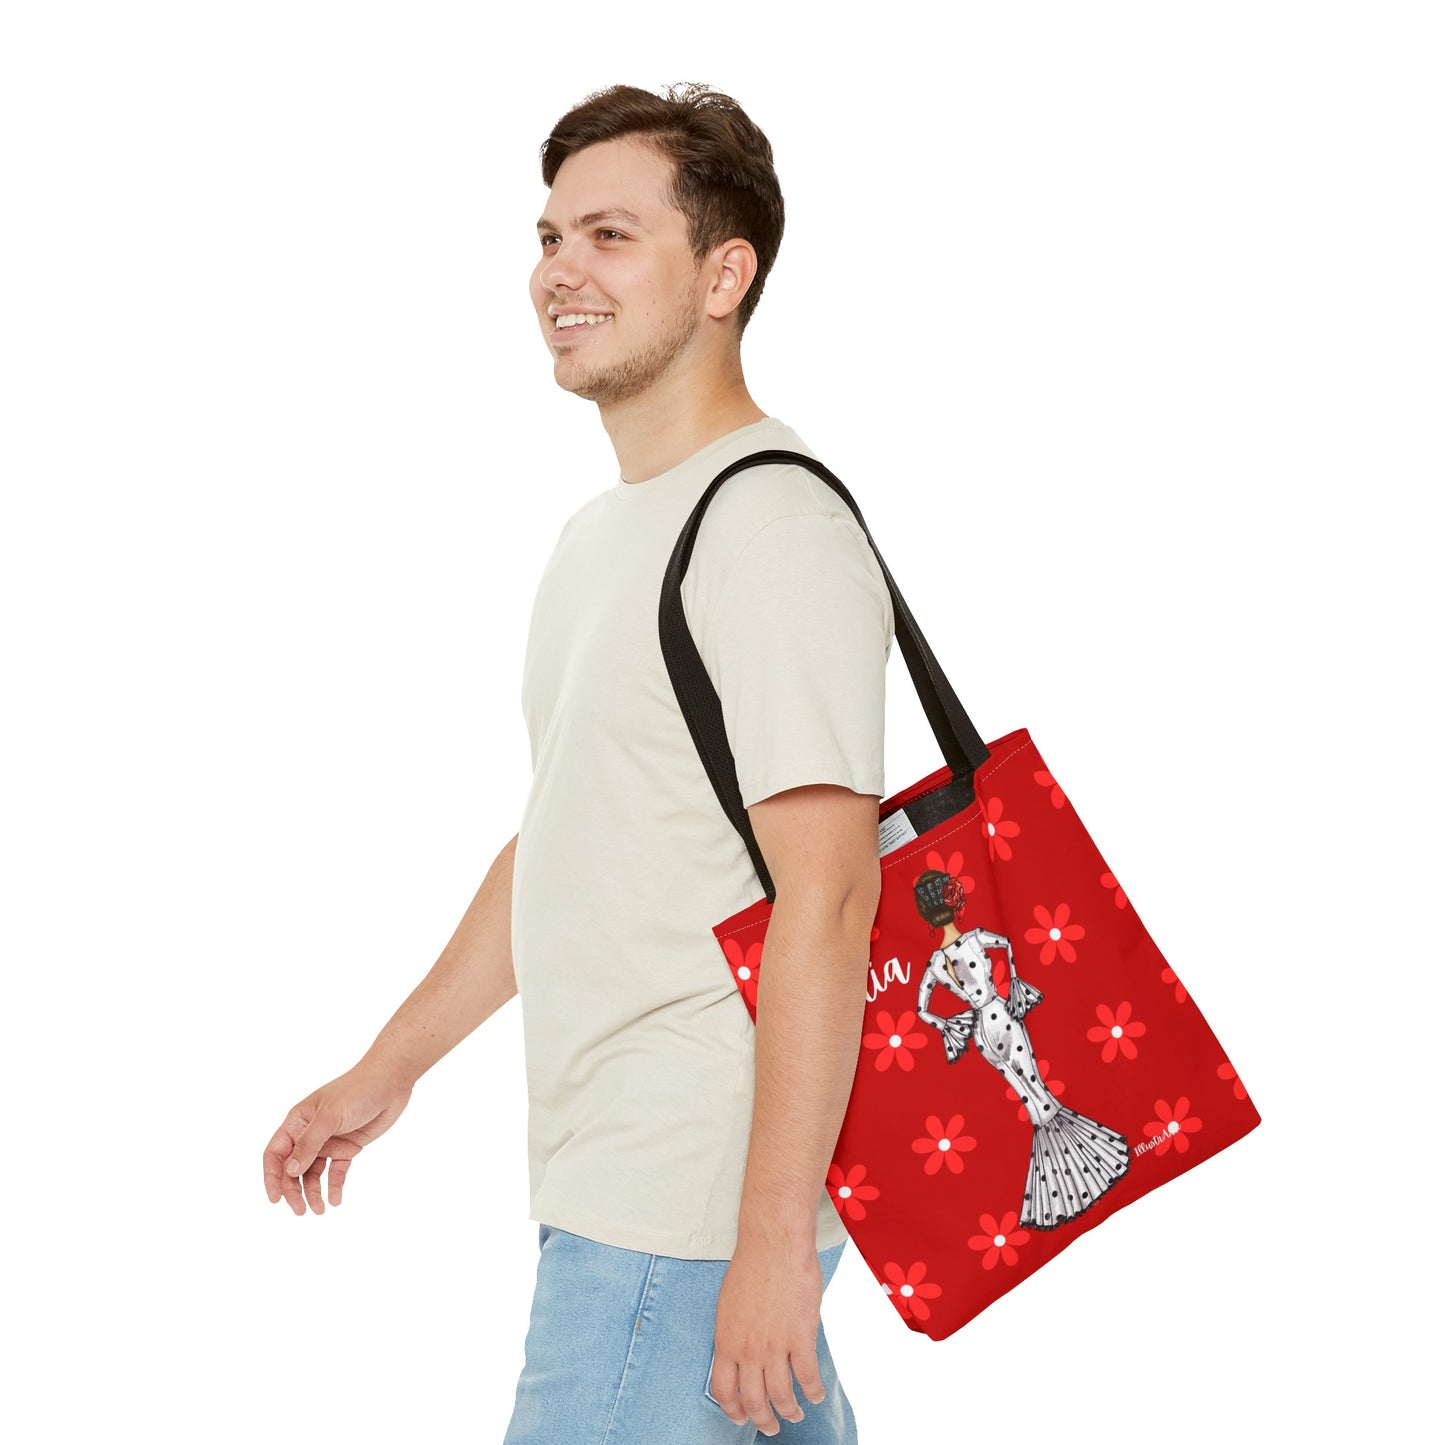 a man carrying a red bag with a dog on it